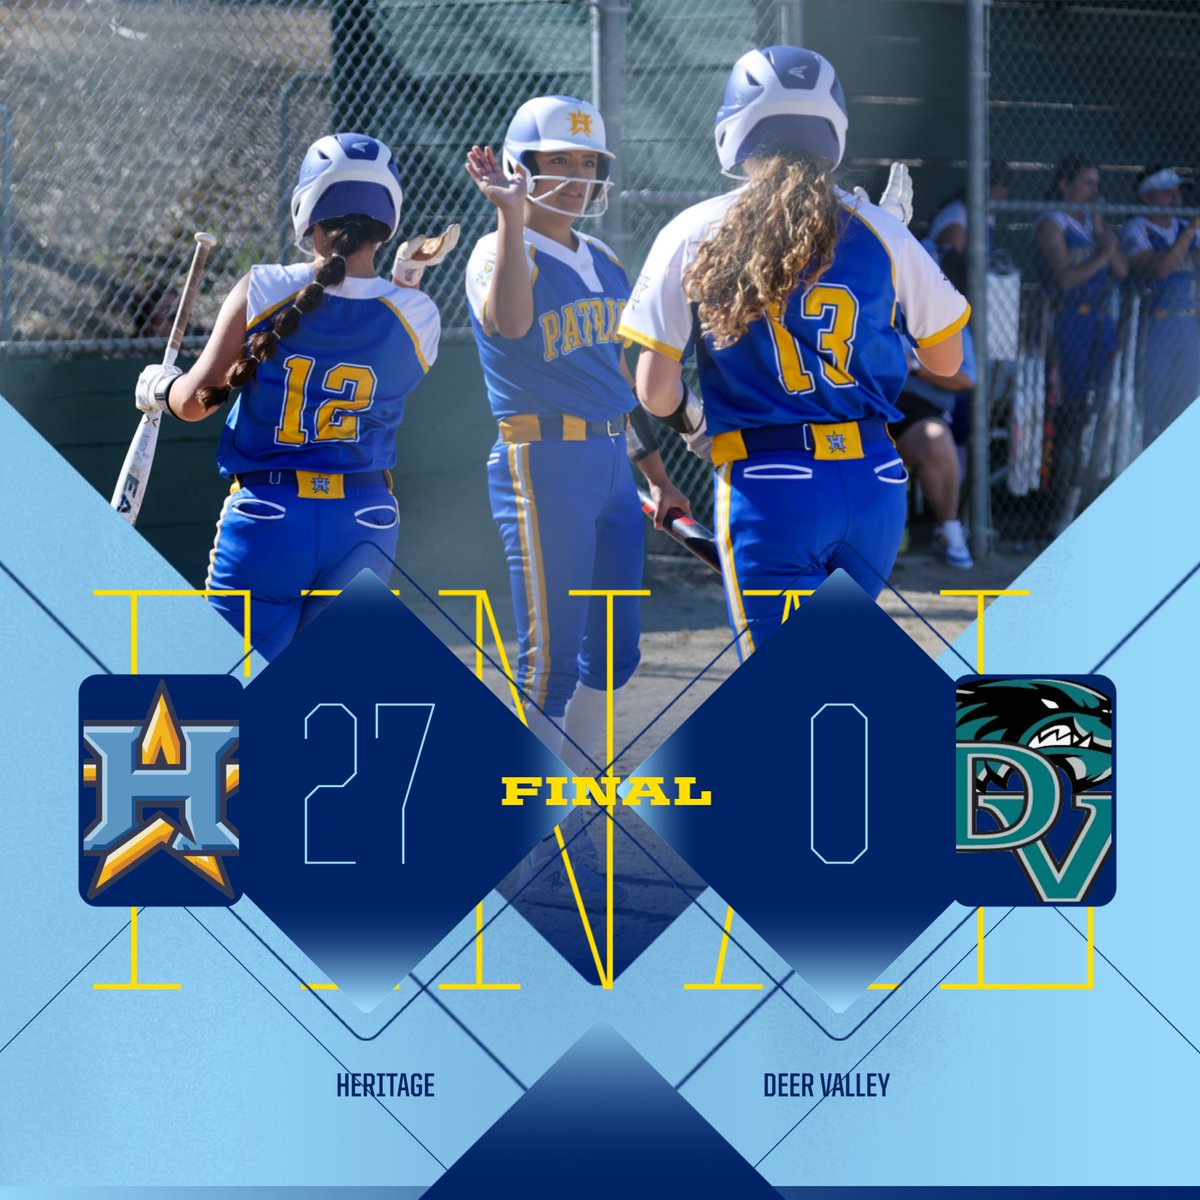 Softball got back on the winning track as it resumed BVAL play with a win over Deer Valley yesterday. Brooklynn Galloway had four hits and five RBI, Mikaela Mortimer added four RBI, while Kylie Garcia and Shyanne Aragon combined for a no-hitter, each allowing just one walk.